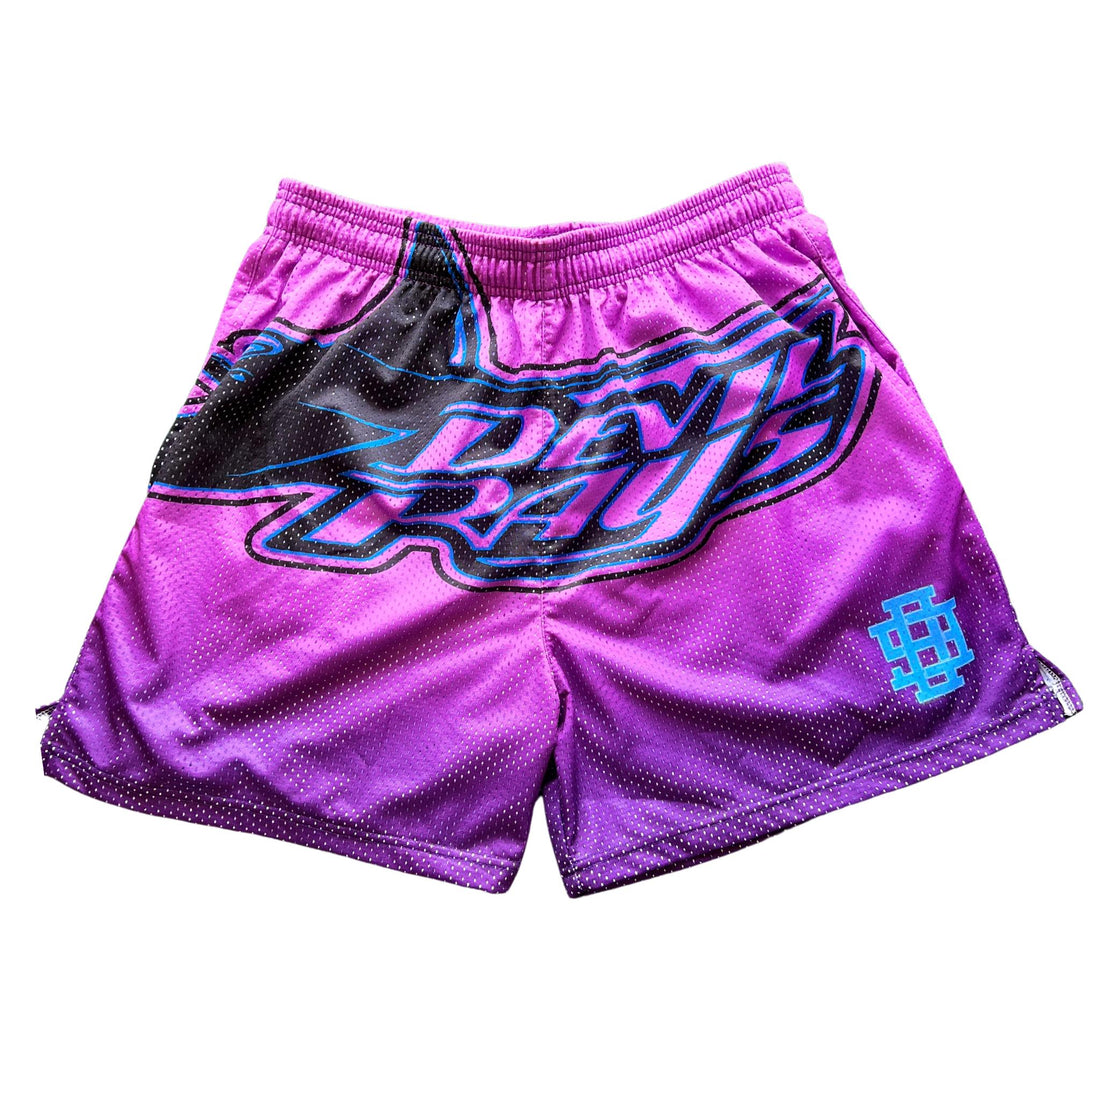 Rays Shorts - Pink